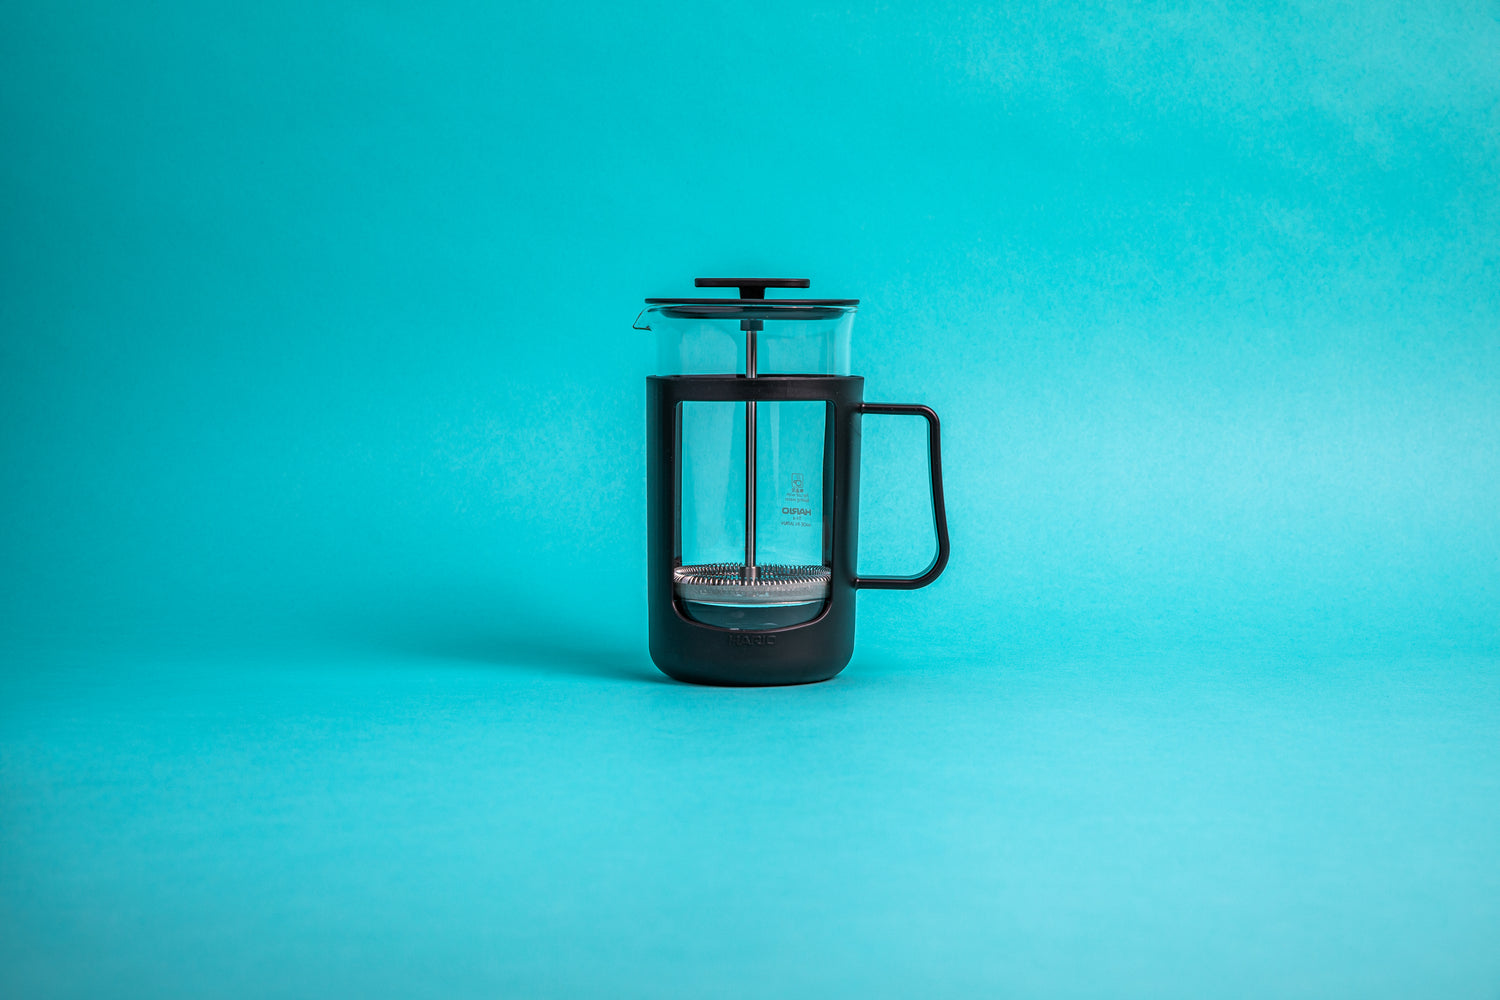 Coffee press featuring a glass pitcher with fluted spout, stainless steel mesh filter with pole, and a black plastic lid, knob, holder, and handle. Set against a blue background.